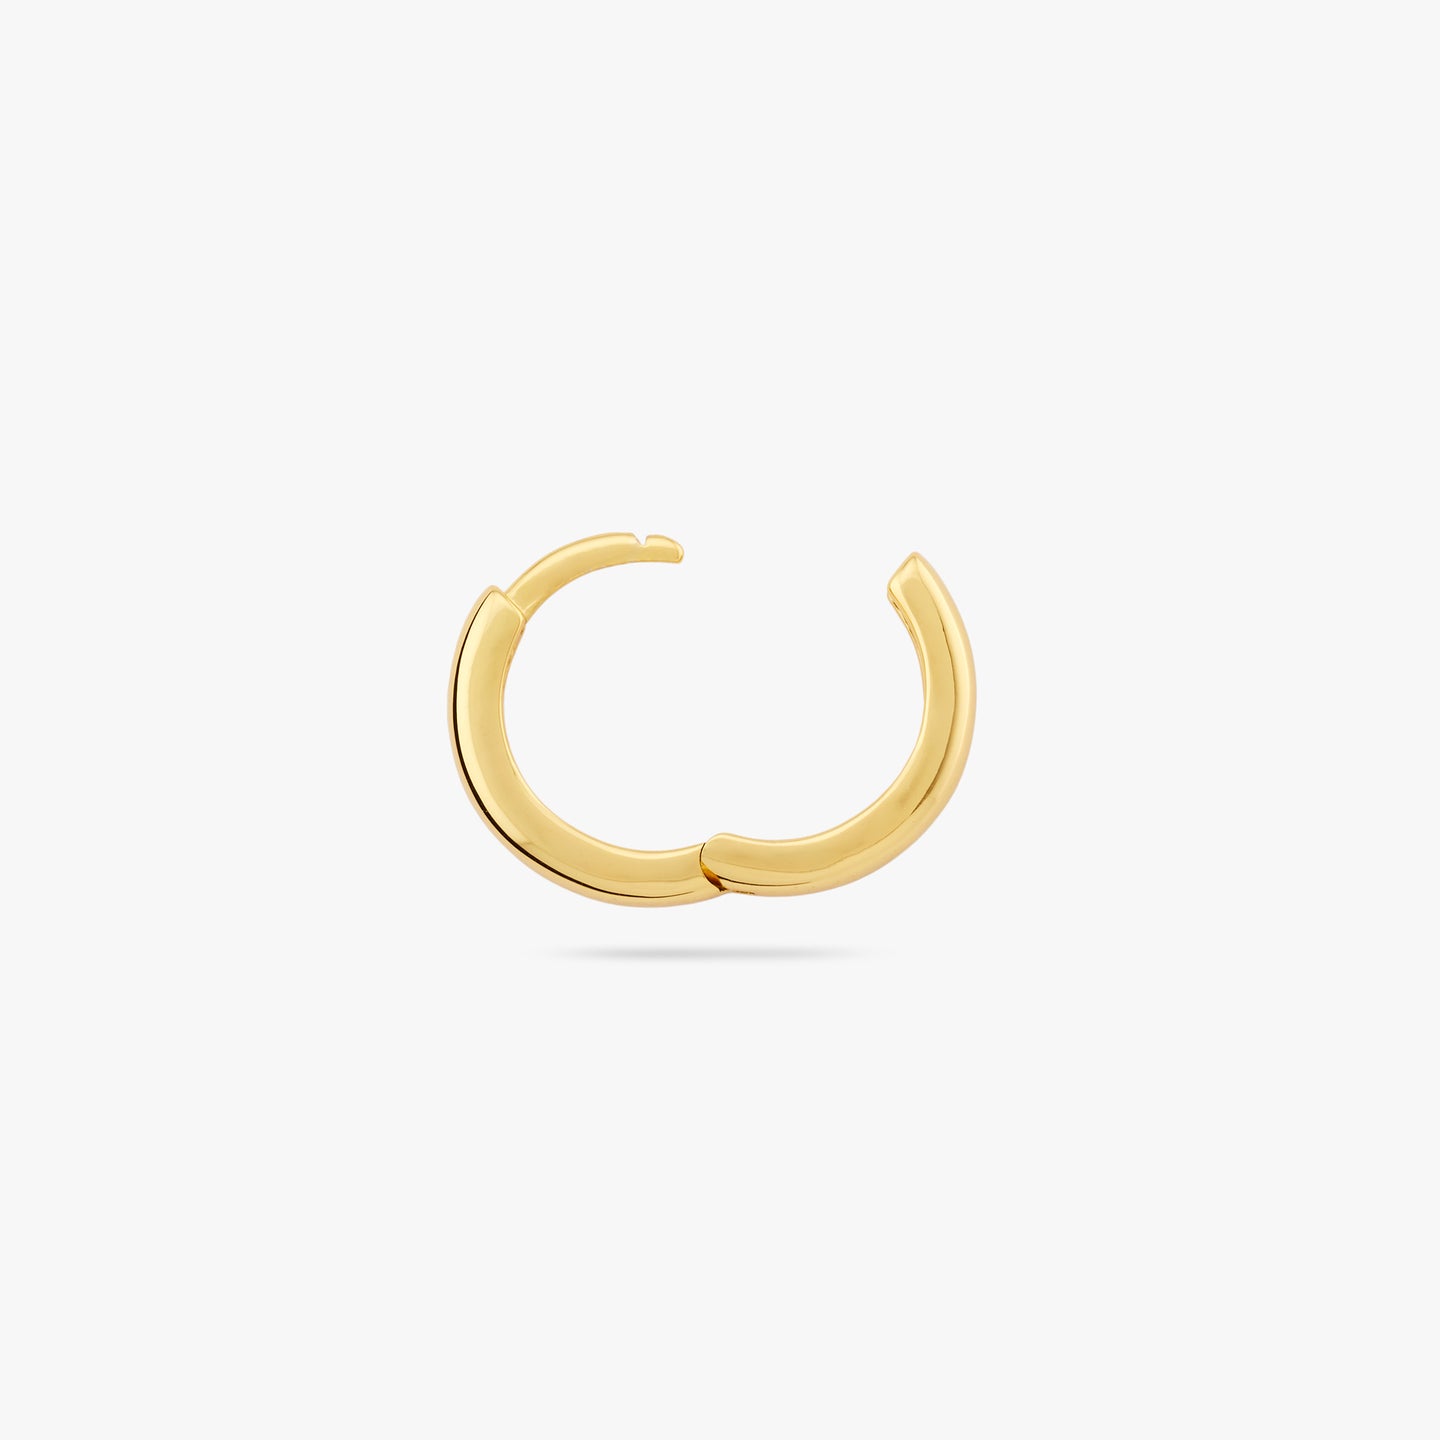 A small bulky and chunky shaped gold huggie and the clasp is undone color:null|gold